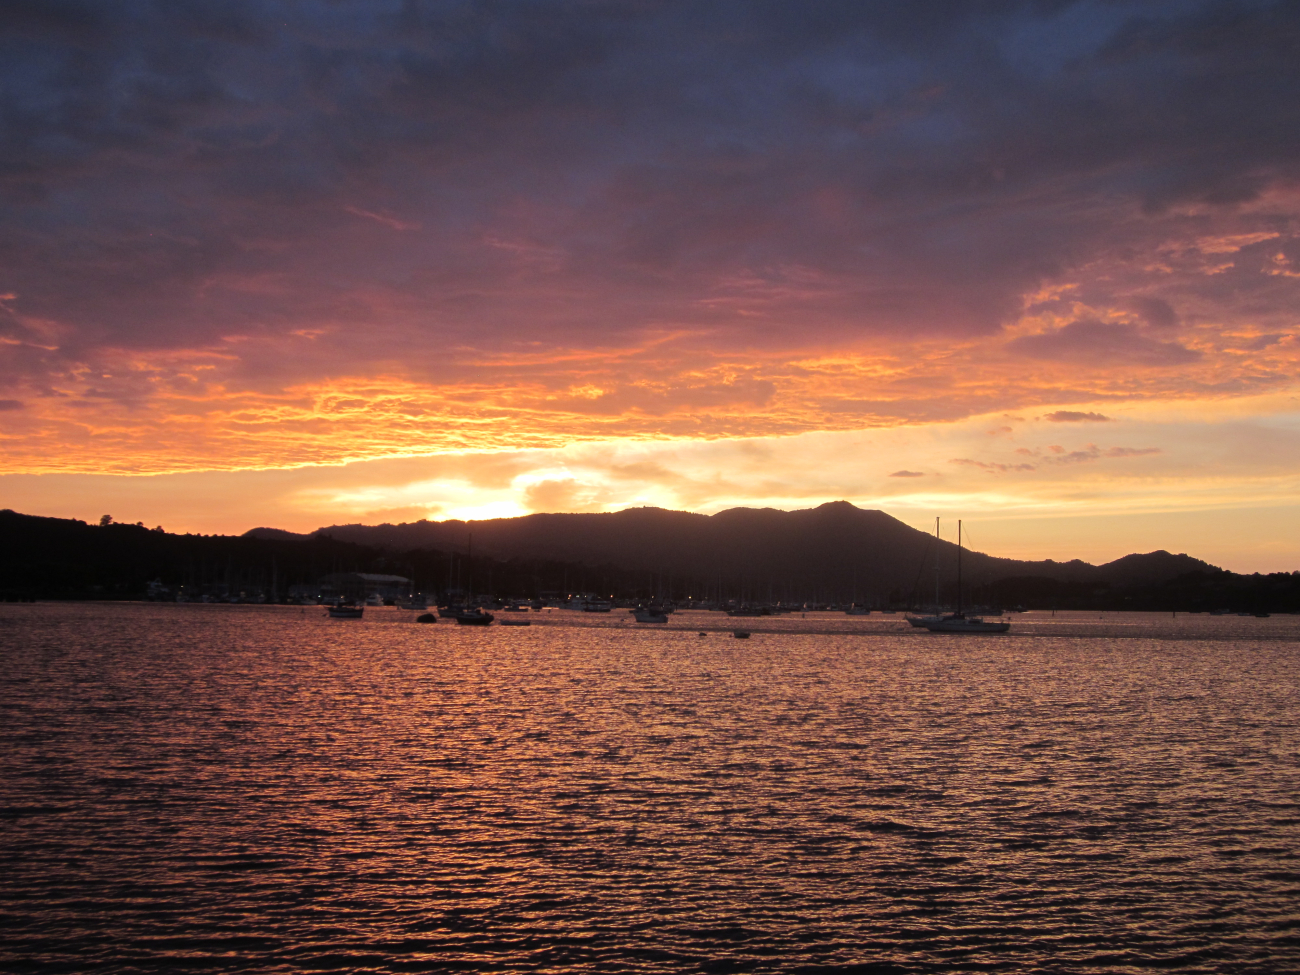 Sunset from the Sausalito waterfront